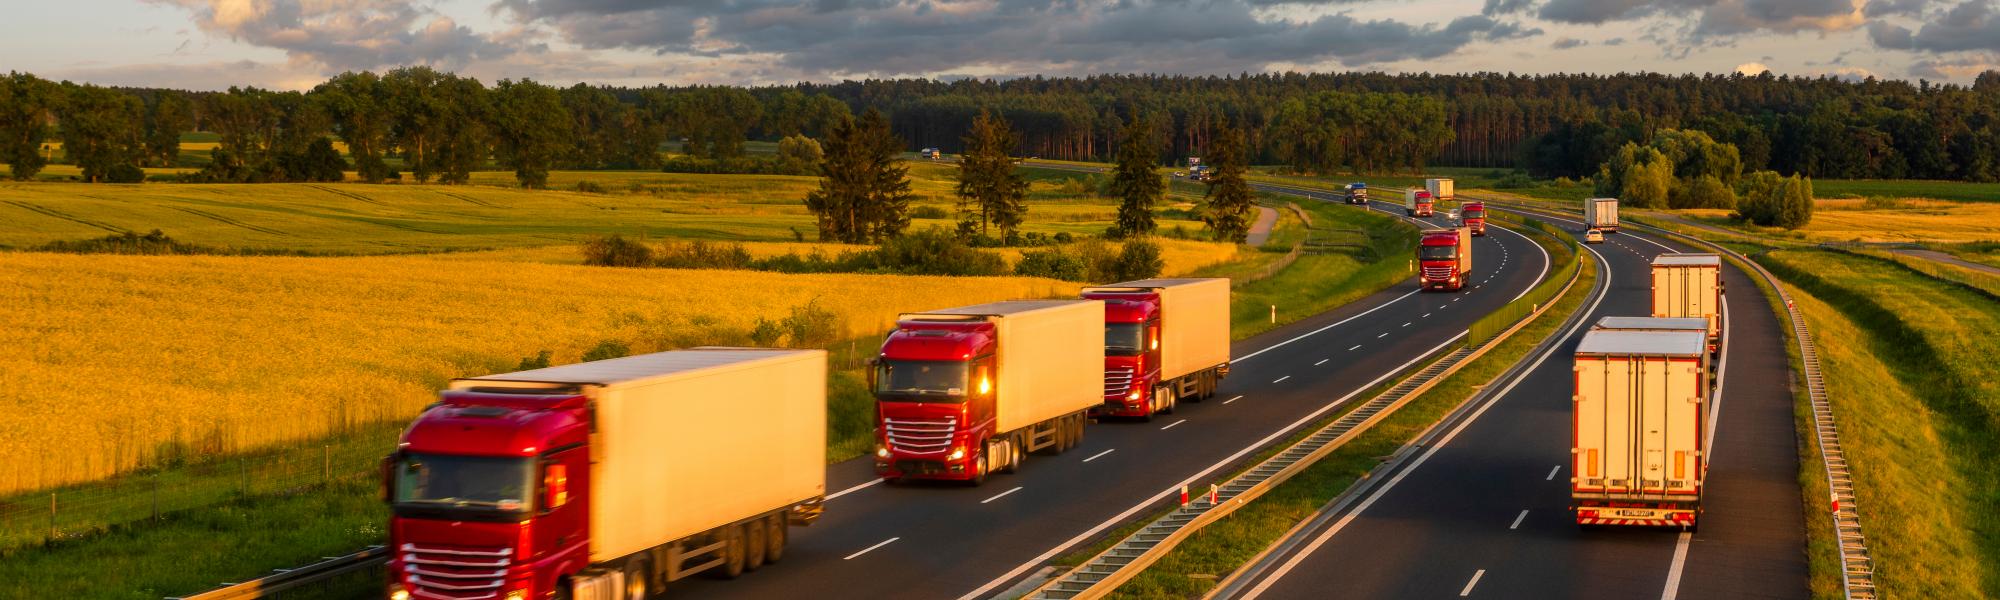 Road Freight sector calls on ENVI to include the sector’s structural and financial needs in a sound EU ETS-road